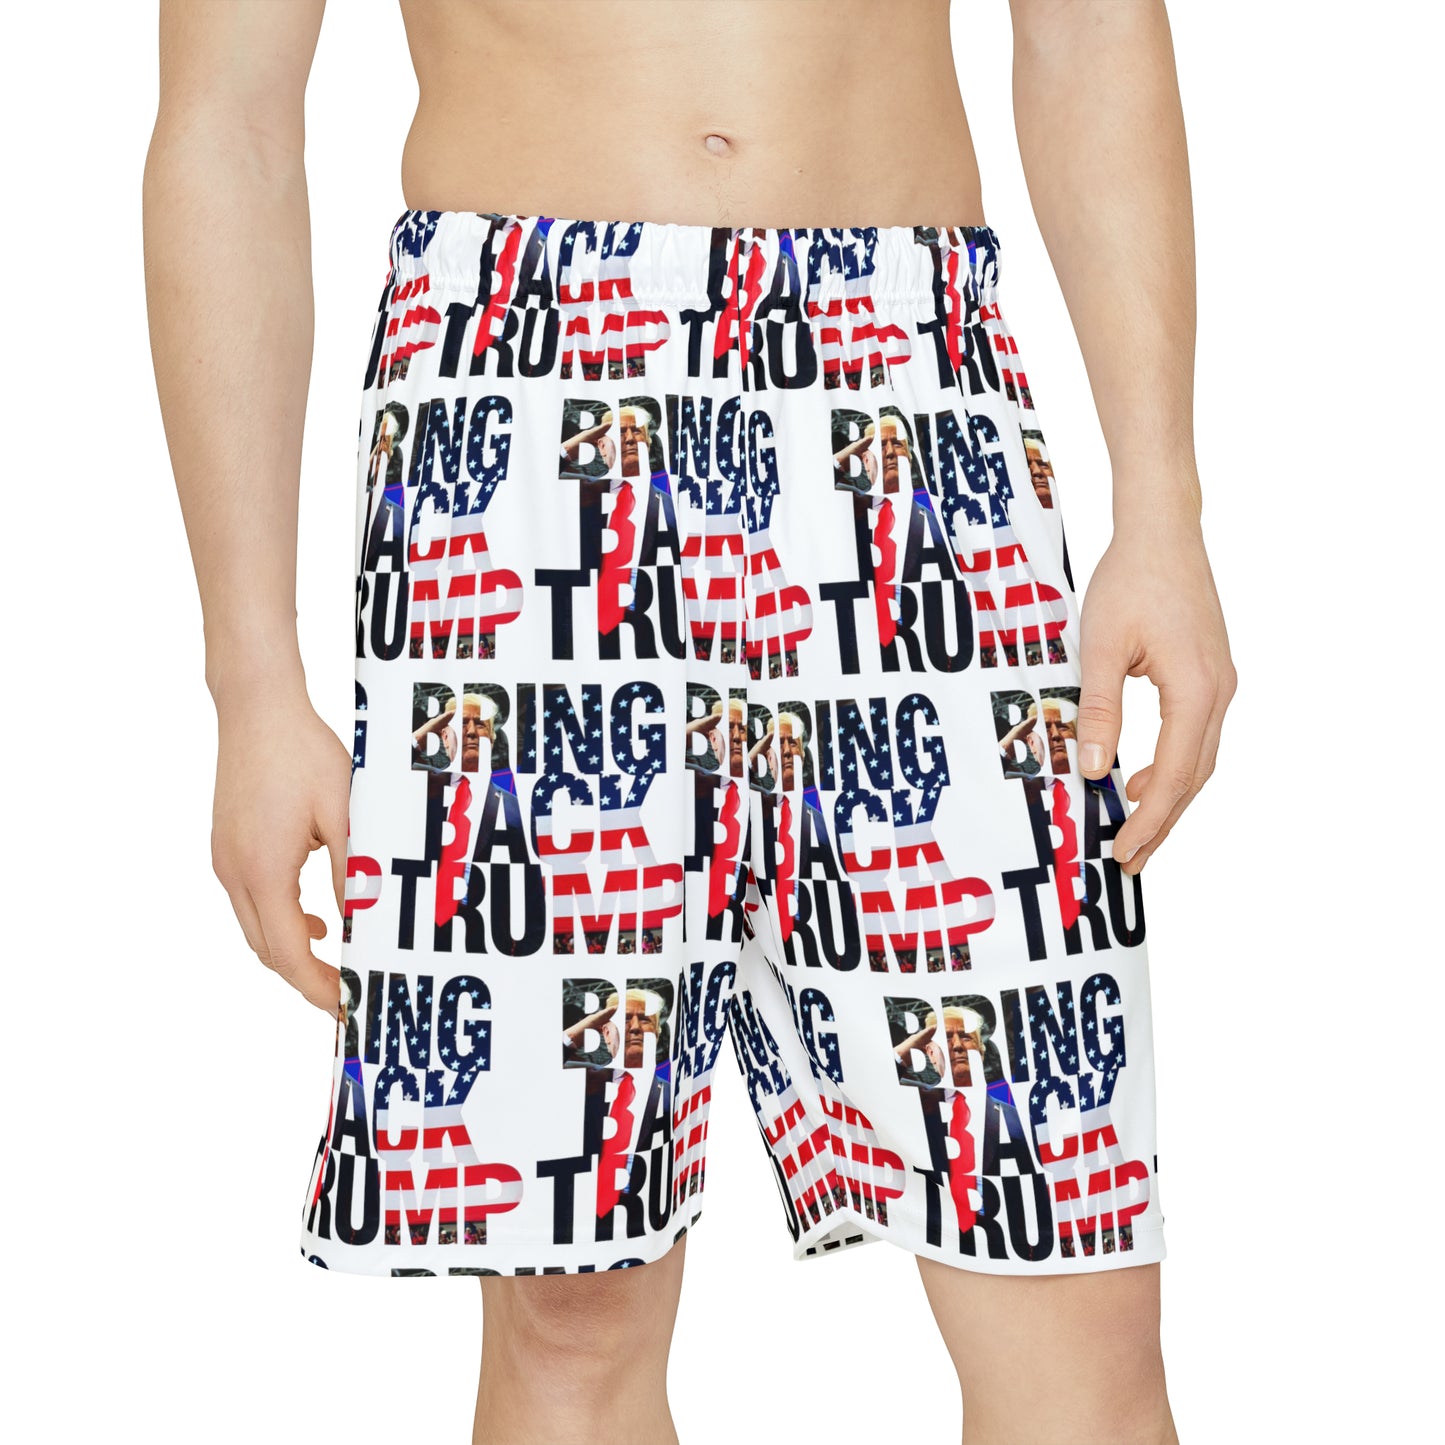 Bring Back Trump All over Print Men’s Sports Athletic Shorts